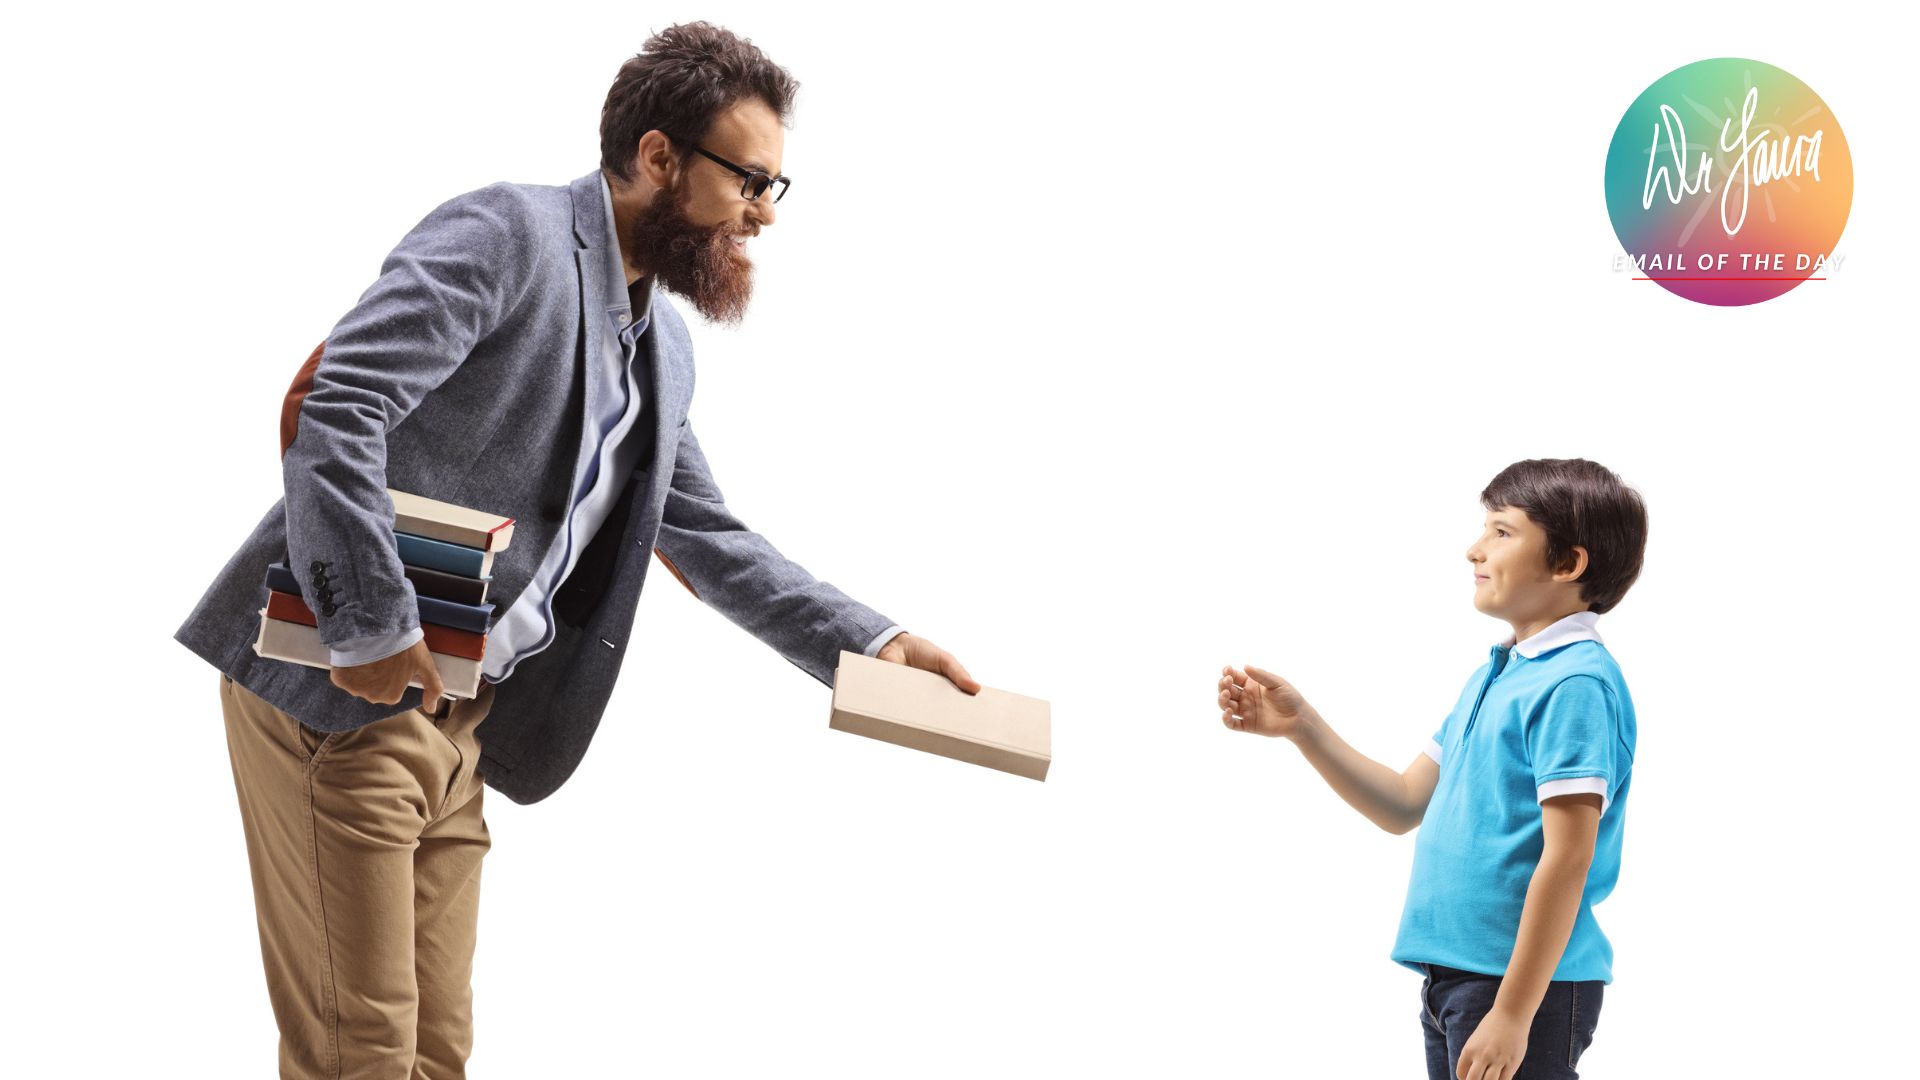 Man leans down to hand book to boy who lifts arm to accept it